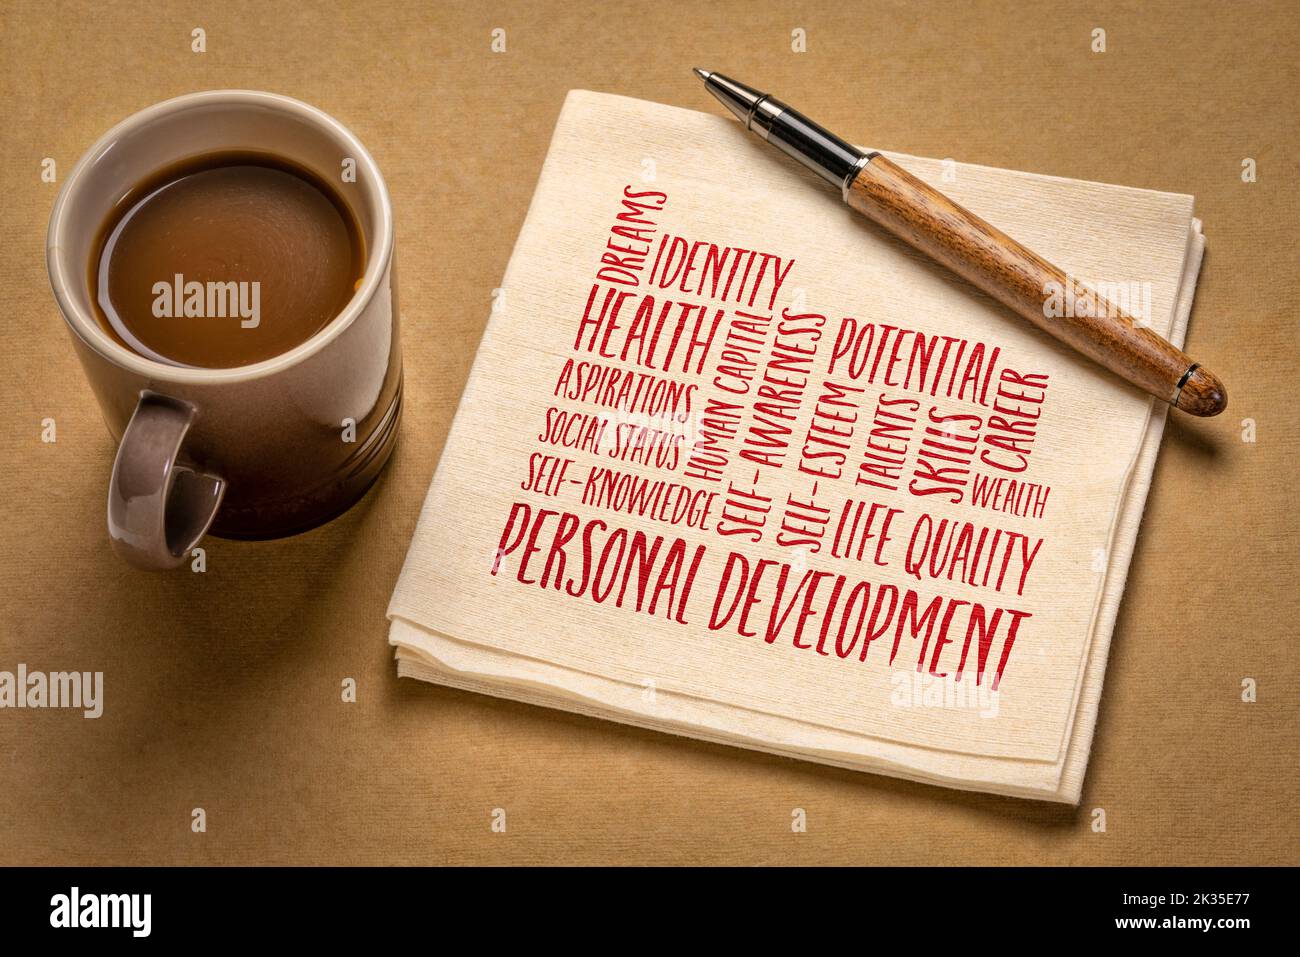 personal development word cloud on a napkin, flat lay with coffee, self improvement concept Stock Photo